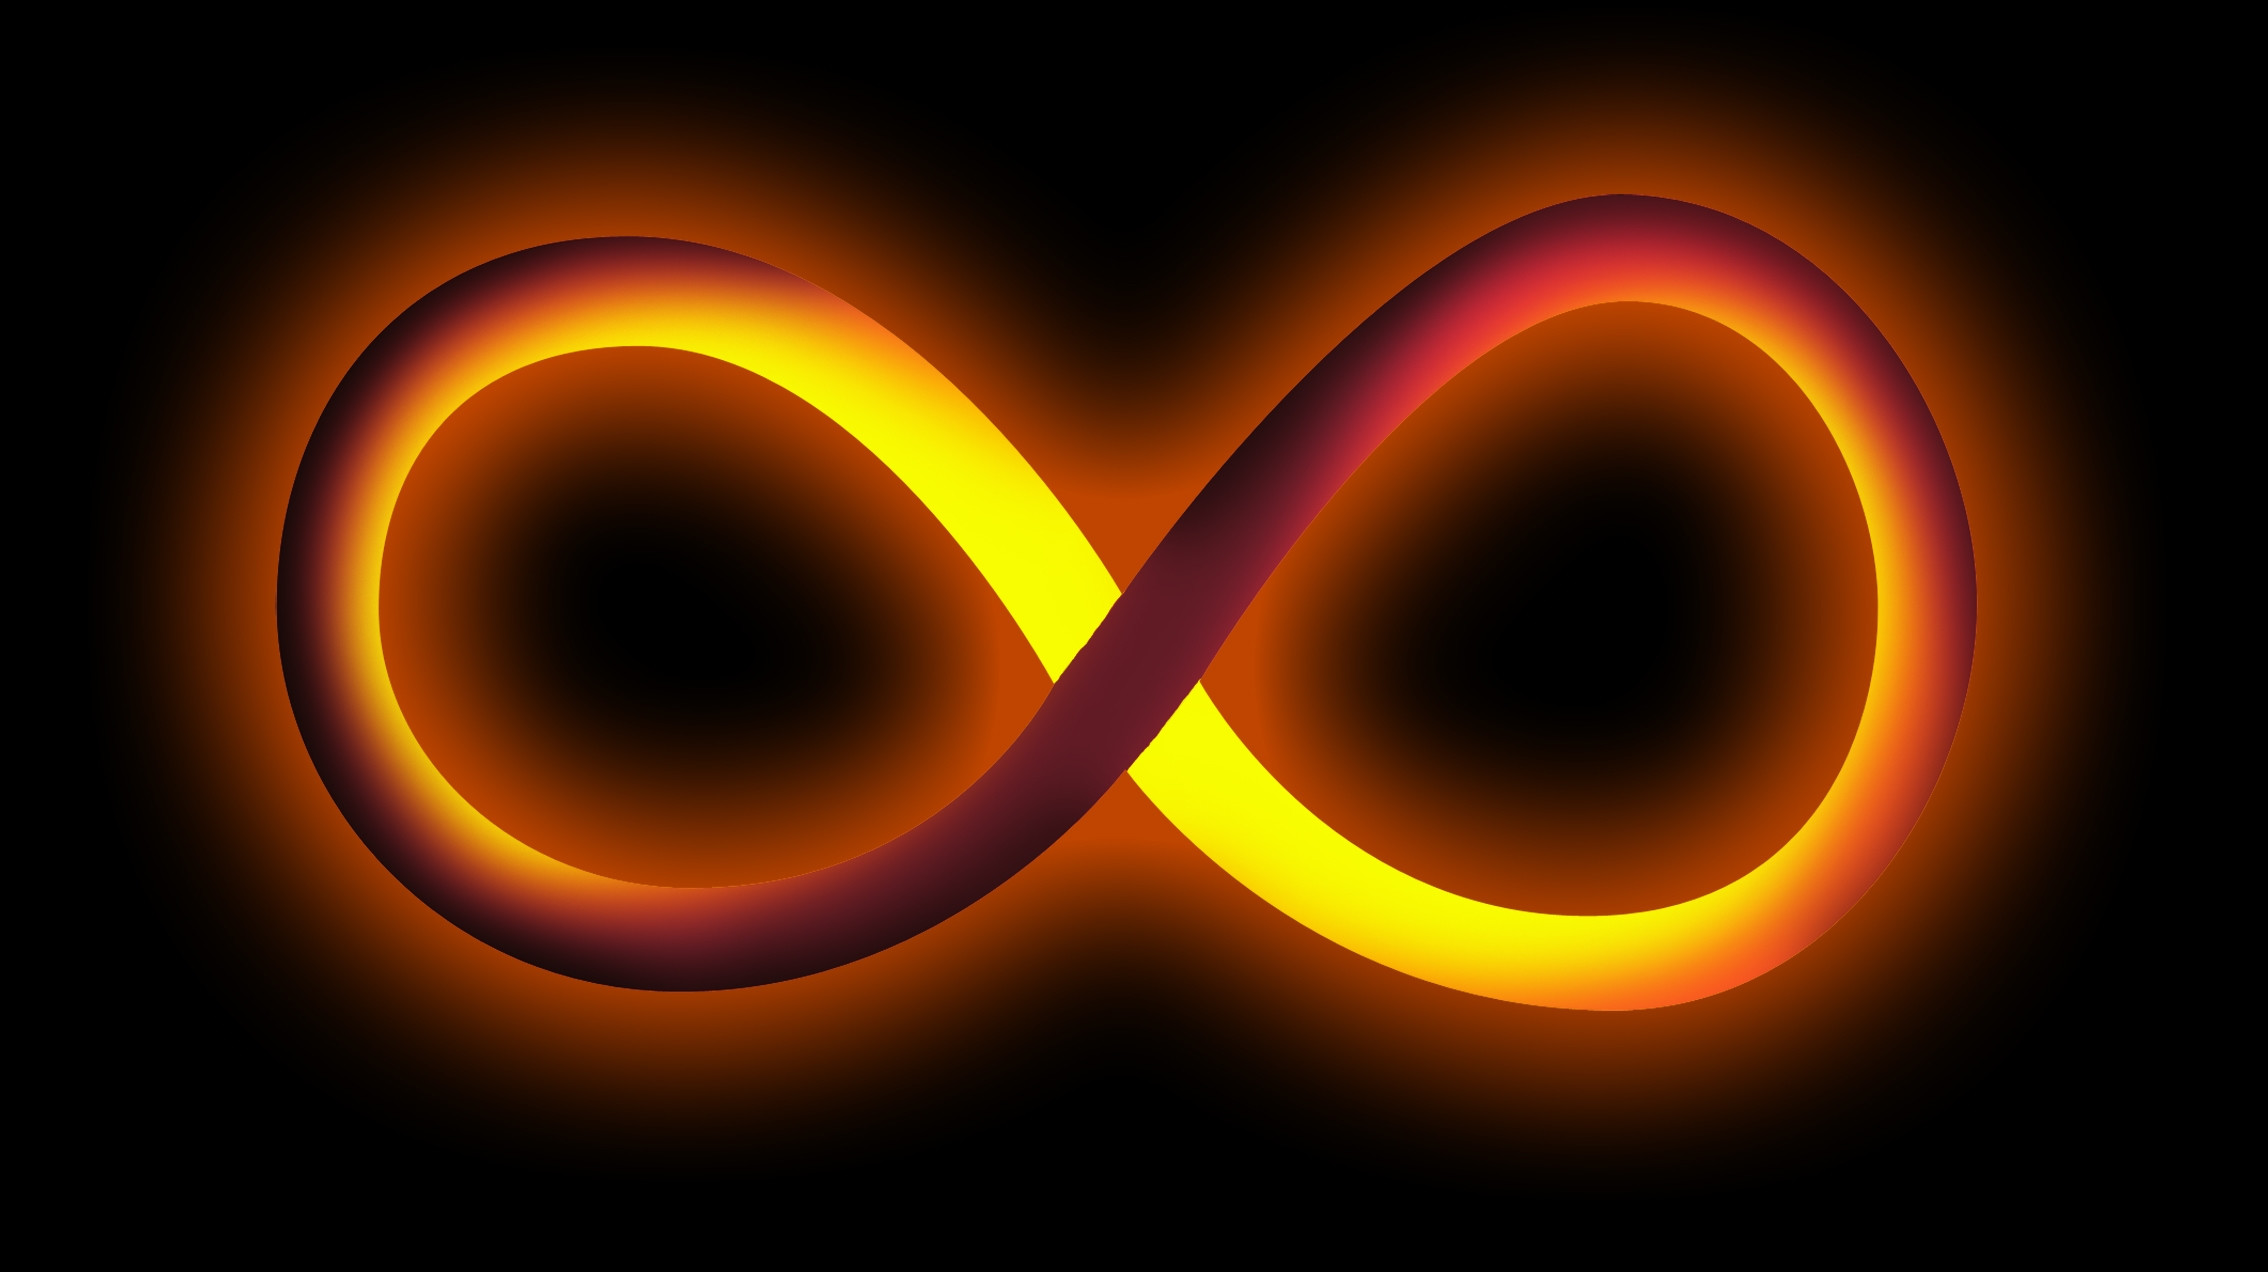 2268x1272 Pink Infinity Sign Wallpaper - image #522